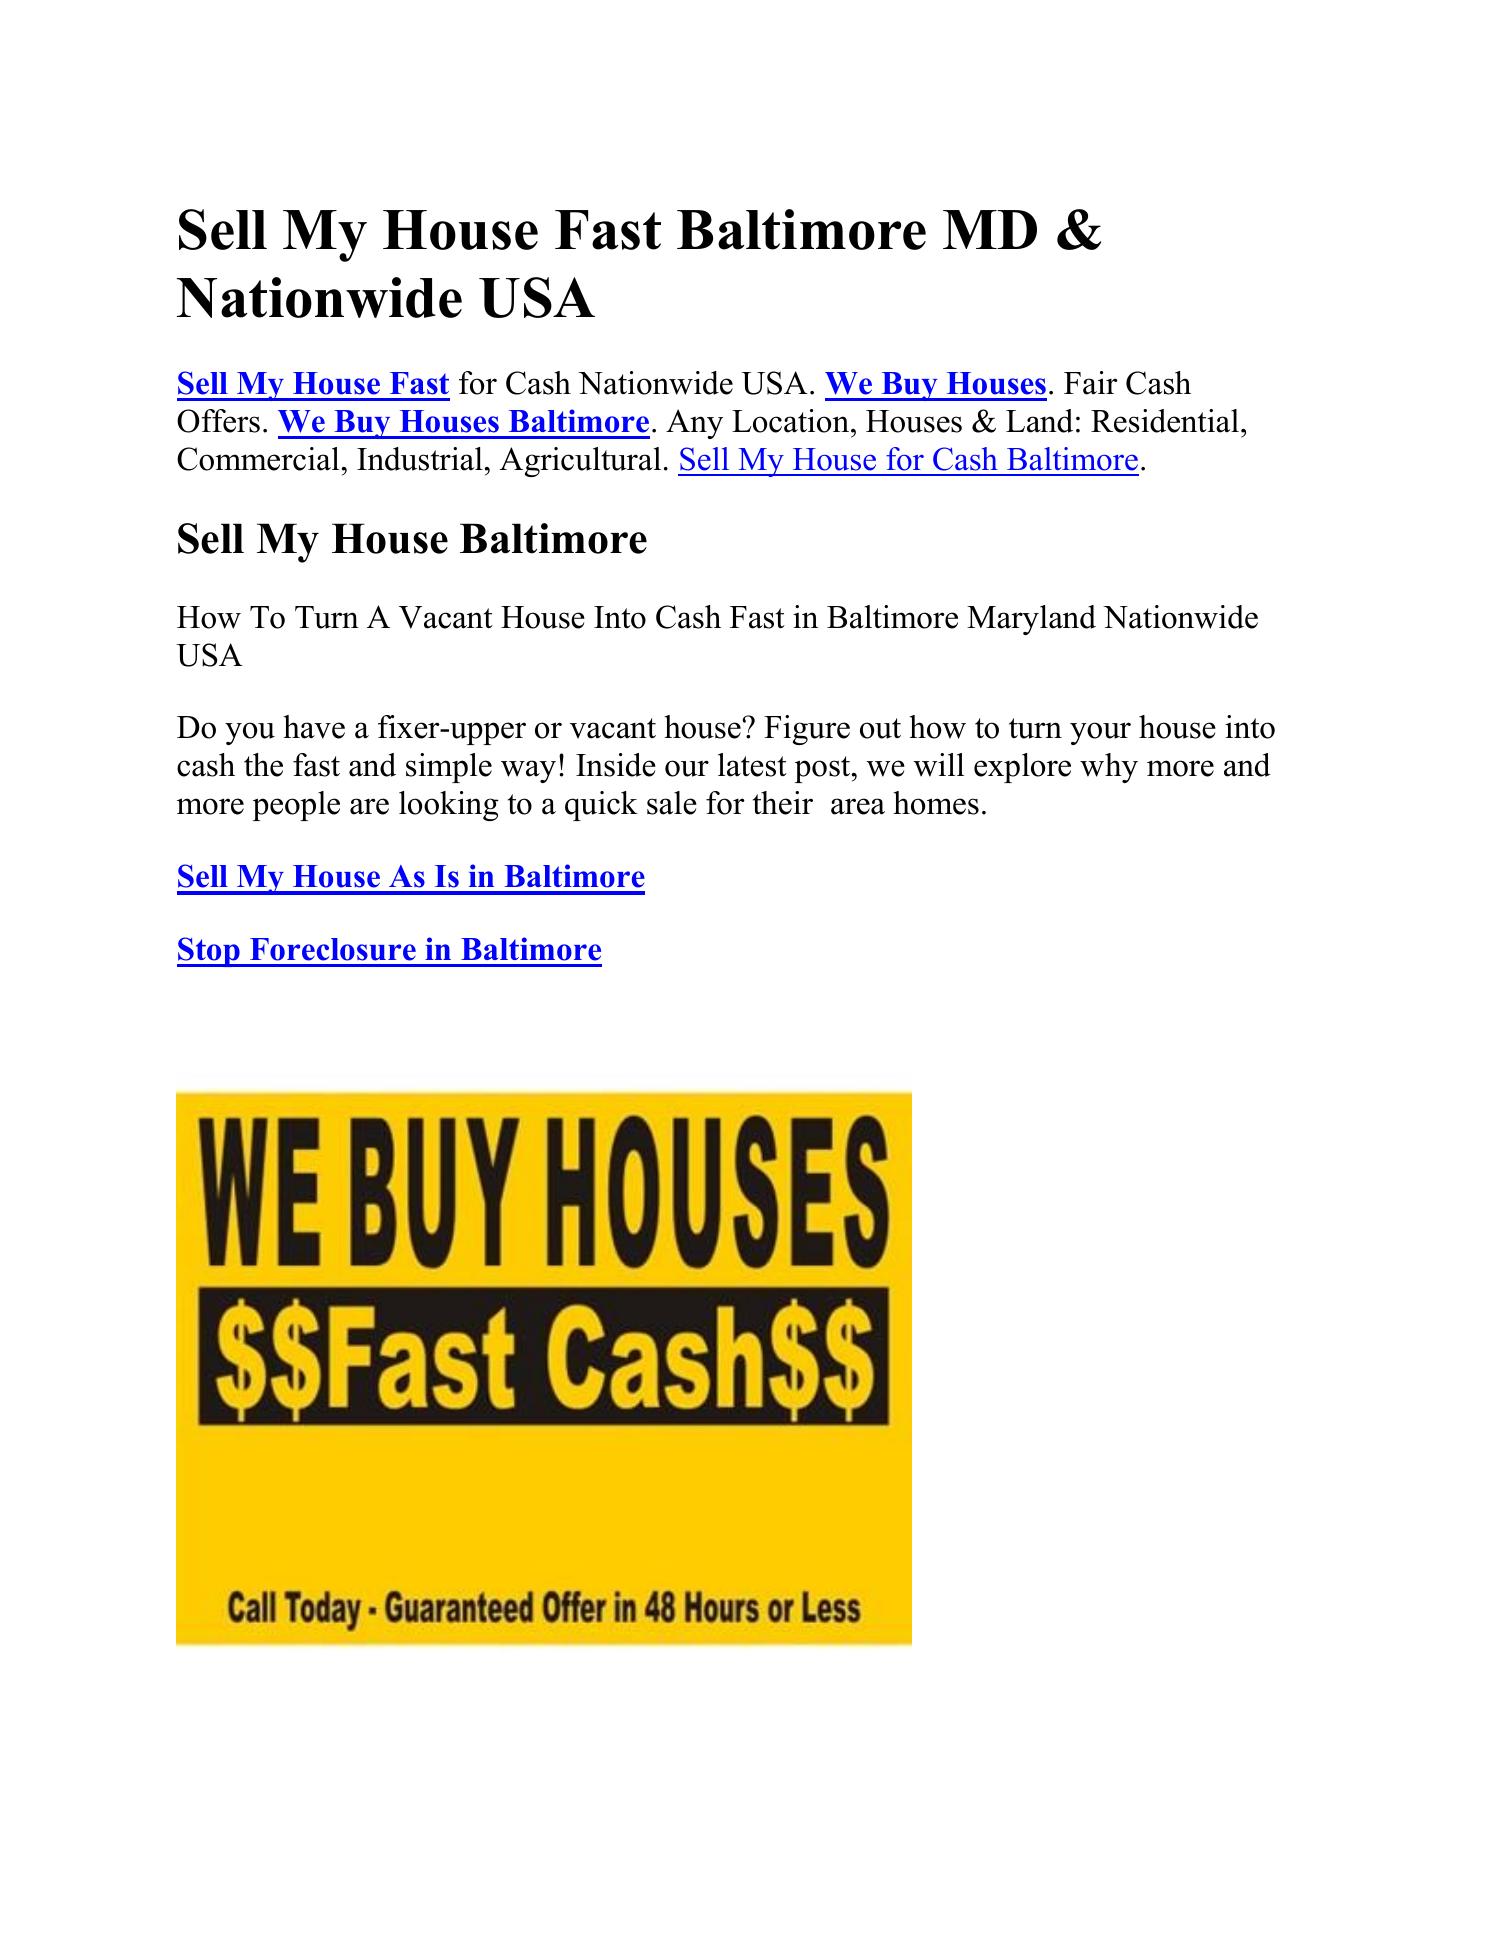 Sell My House Fast Baltimore (1).pdf DocDroid